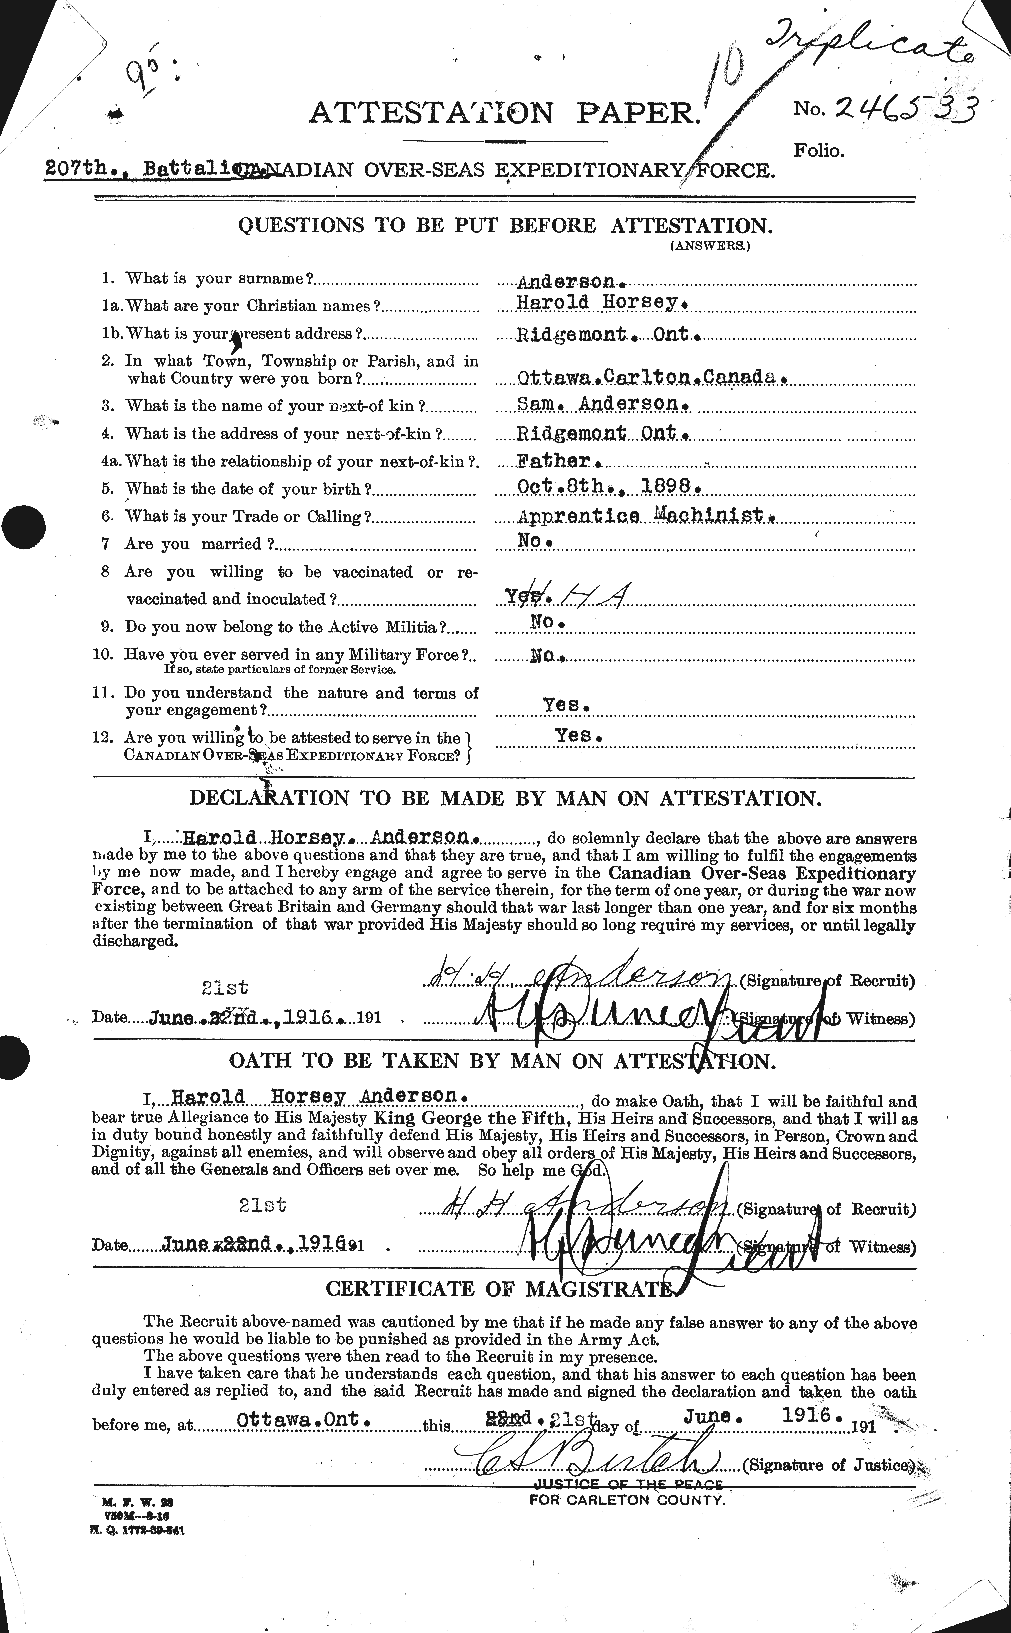 Personnel Records of the First World War - CEF 213287a